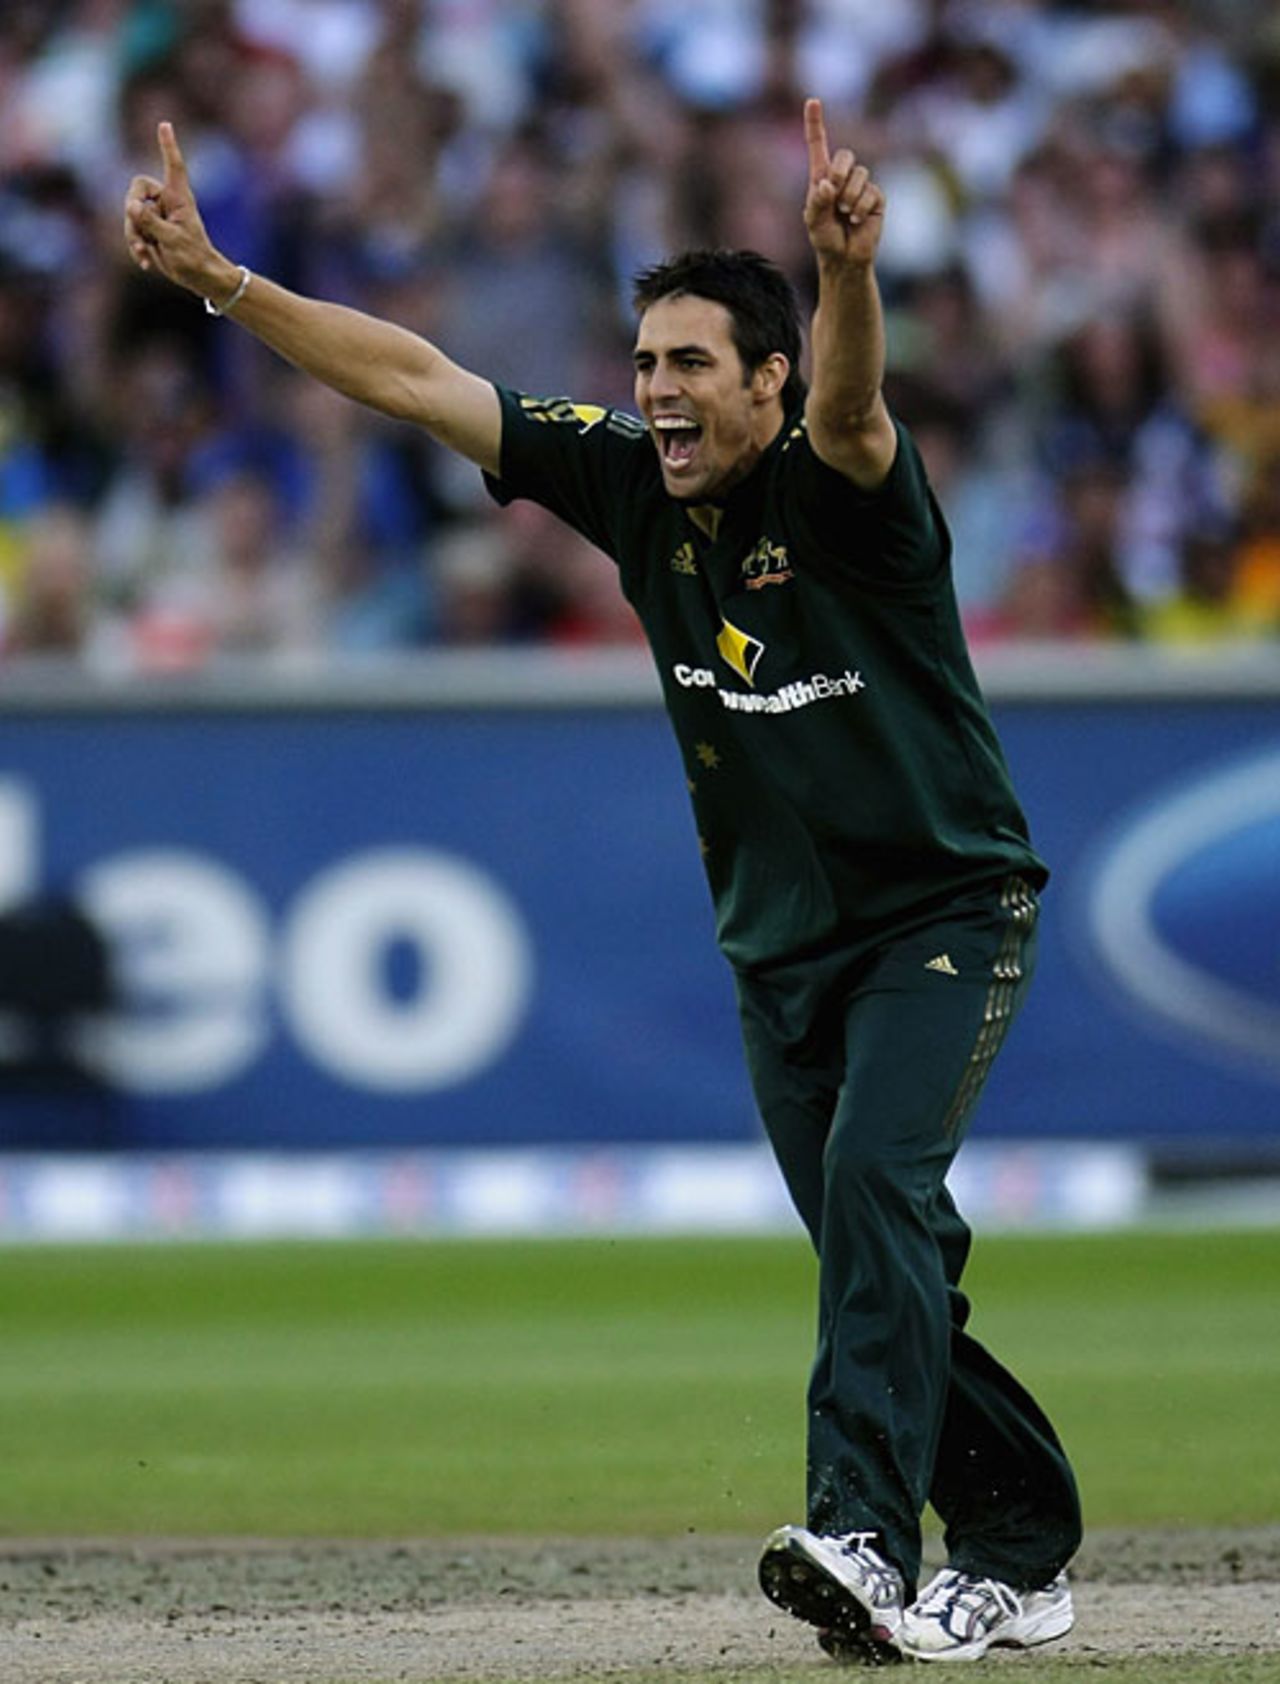 Mitchell Johnson appeals for lbw against Irfan Pathan, Australia v India, CB Series, 4th ODI, Melbourne, February 10, 2008